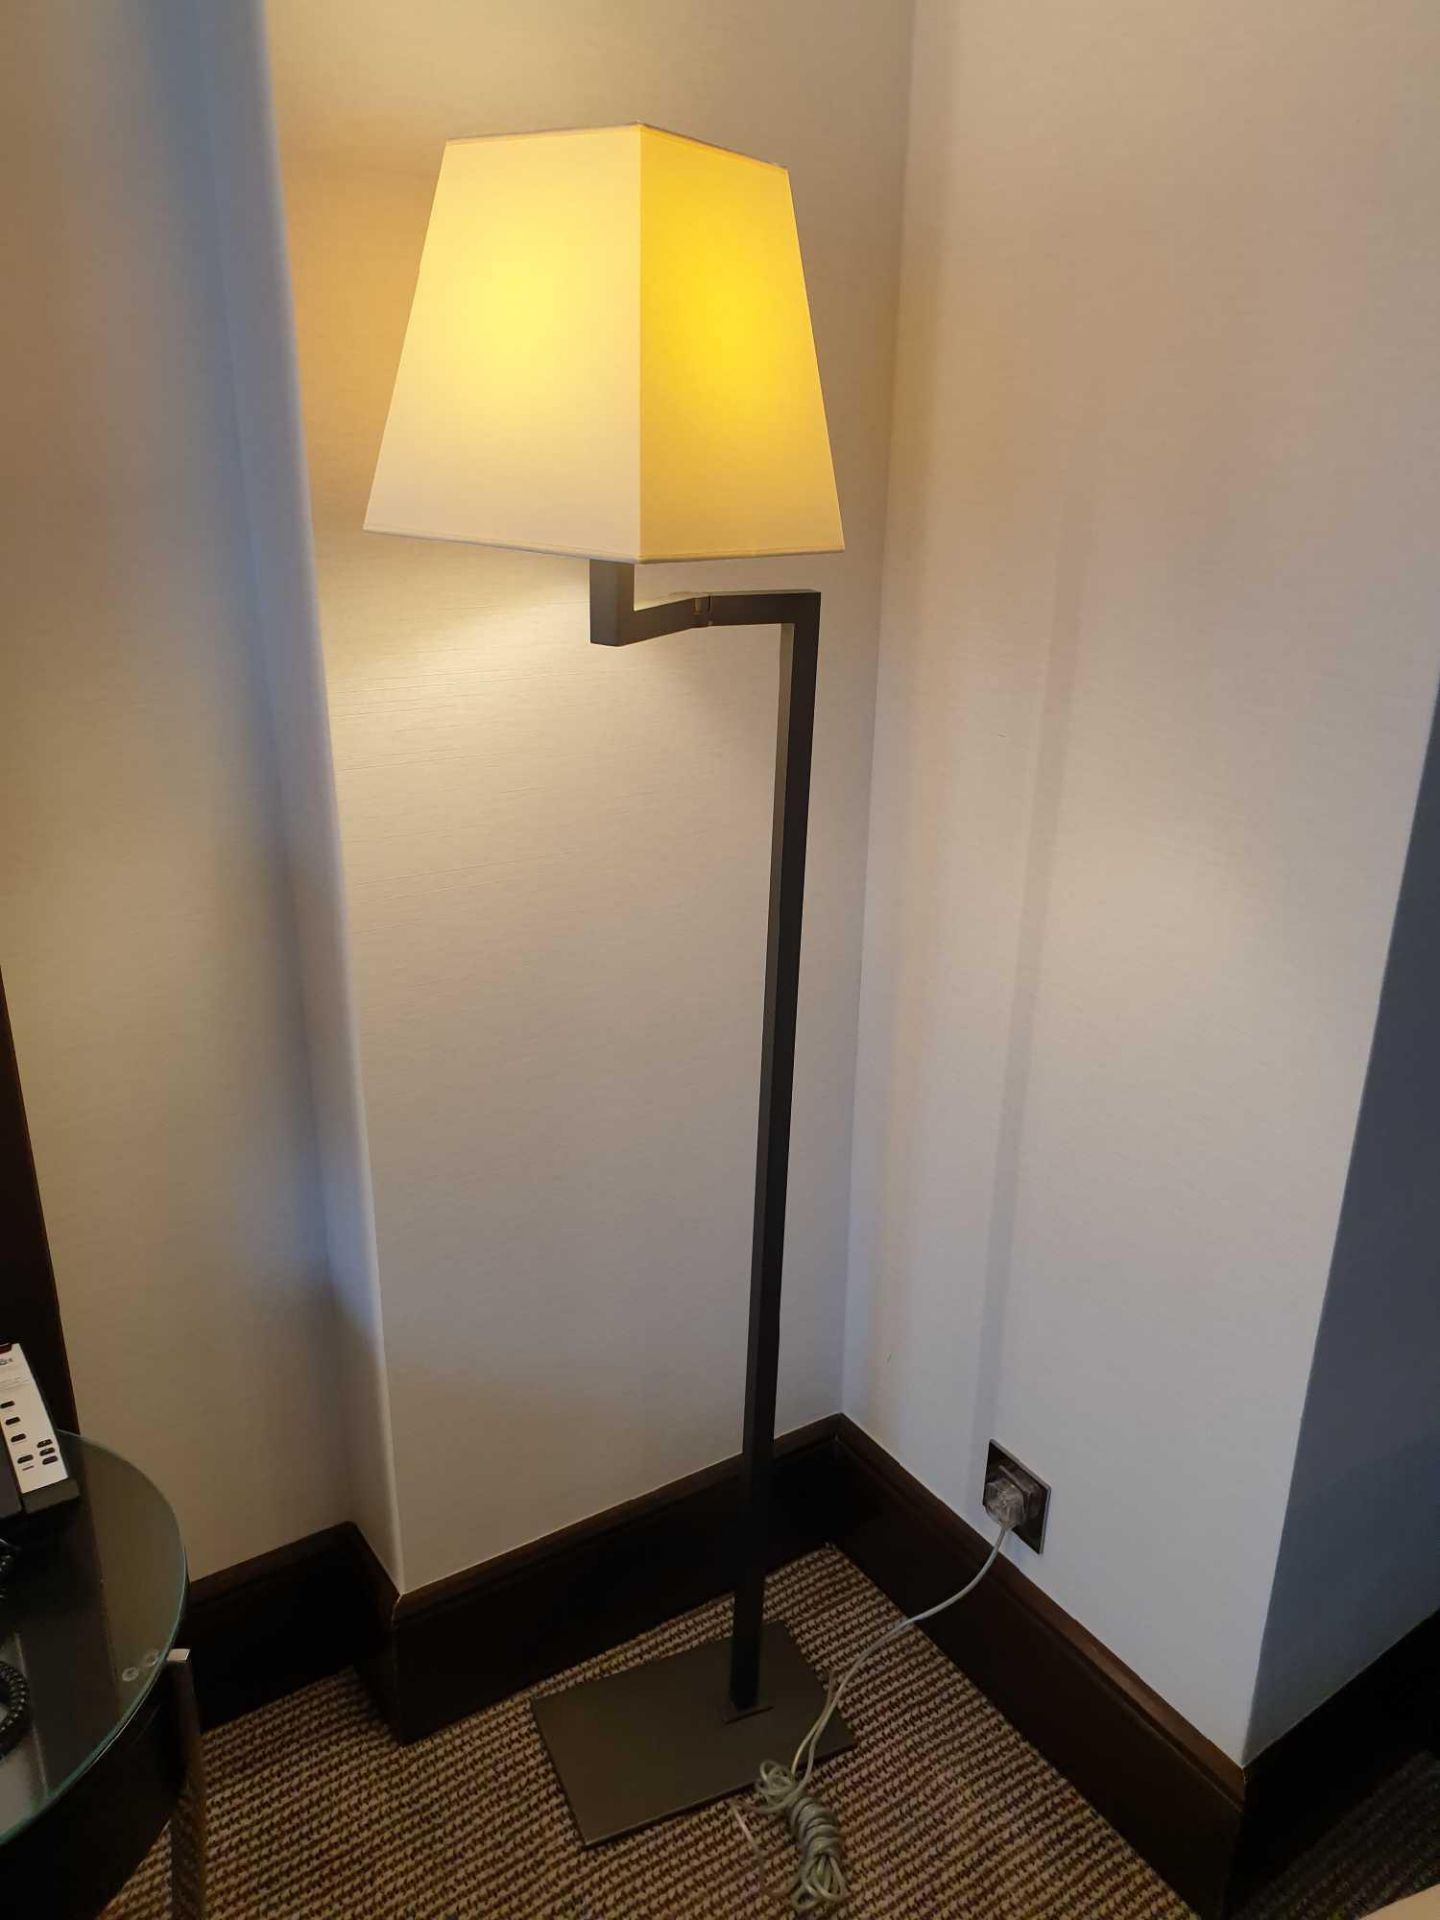 Sifra Floor Lamp Model LMS 600 ENG Grey Metal Base With Single Arm Single Bulb Complete With Cream - Bild 3 aus 3